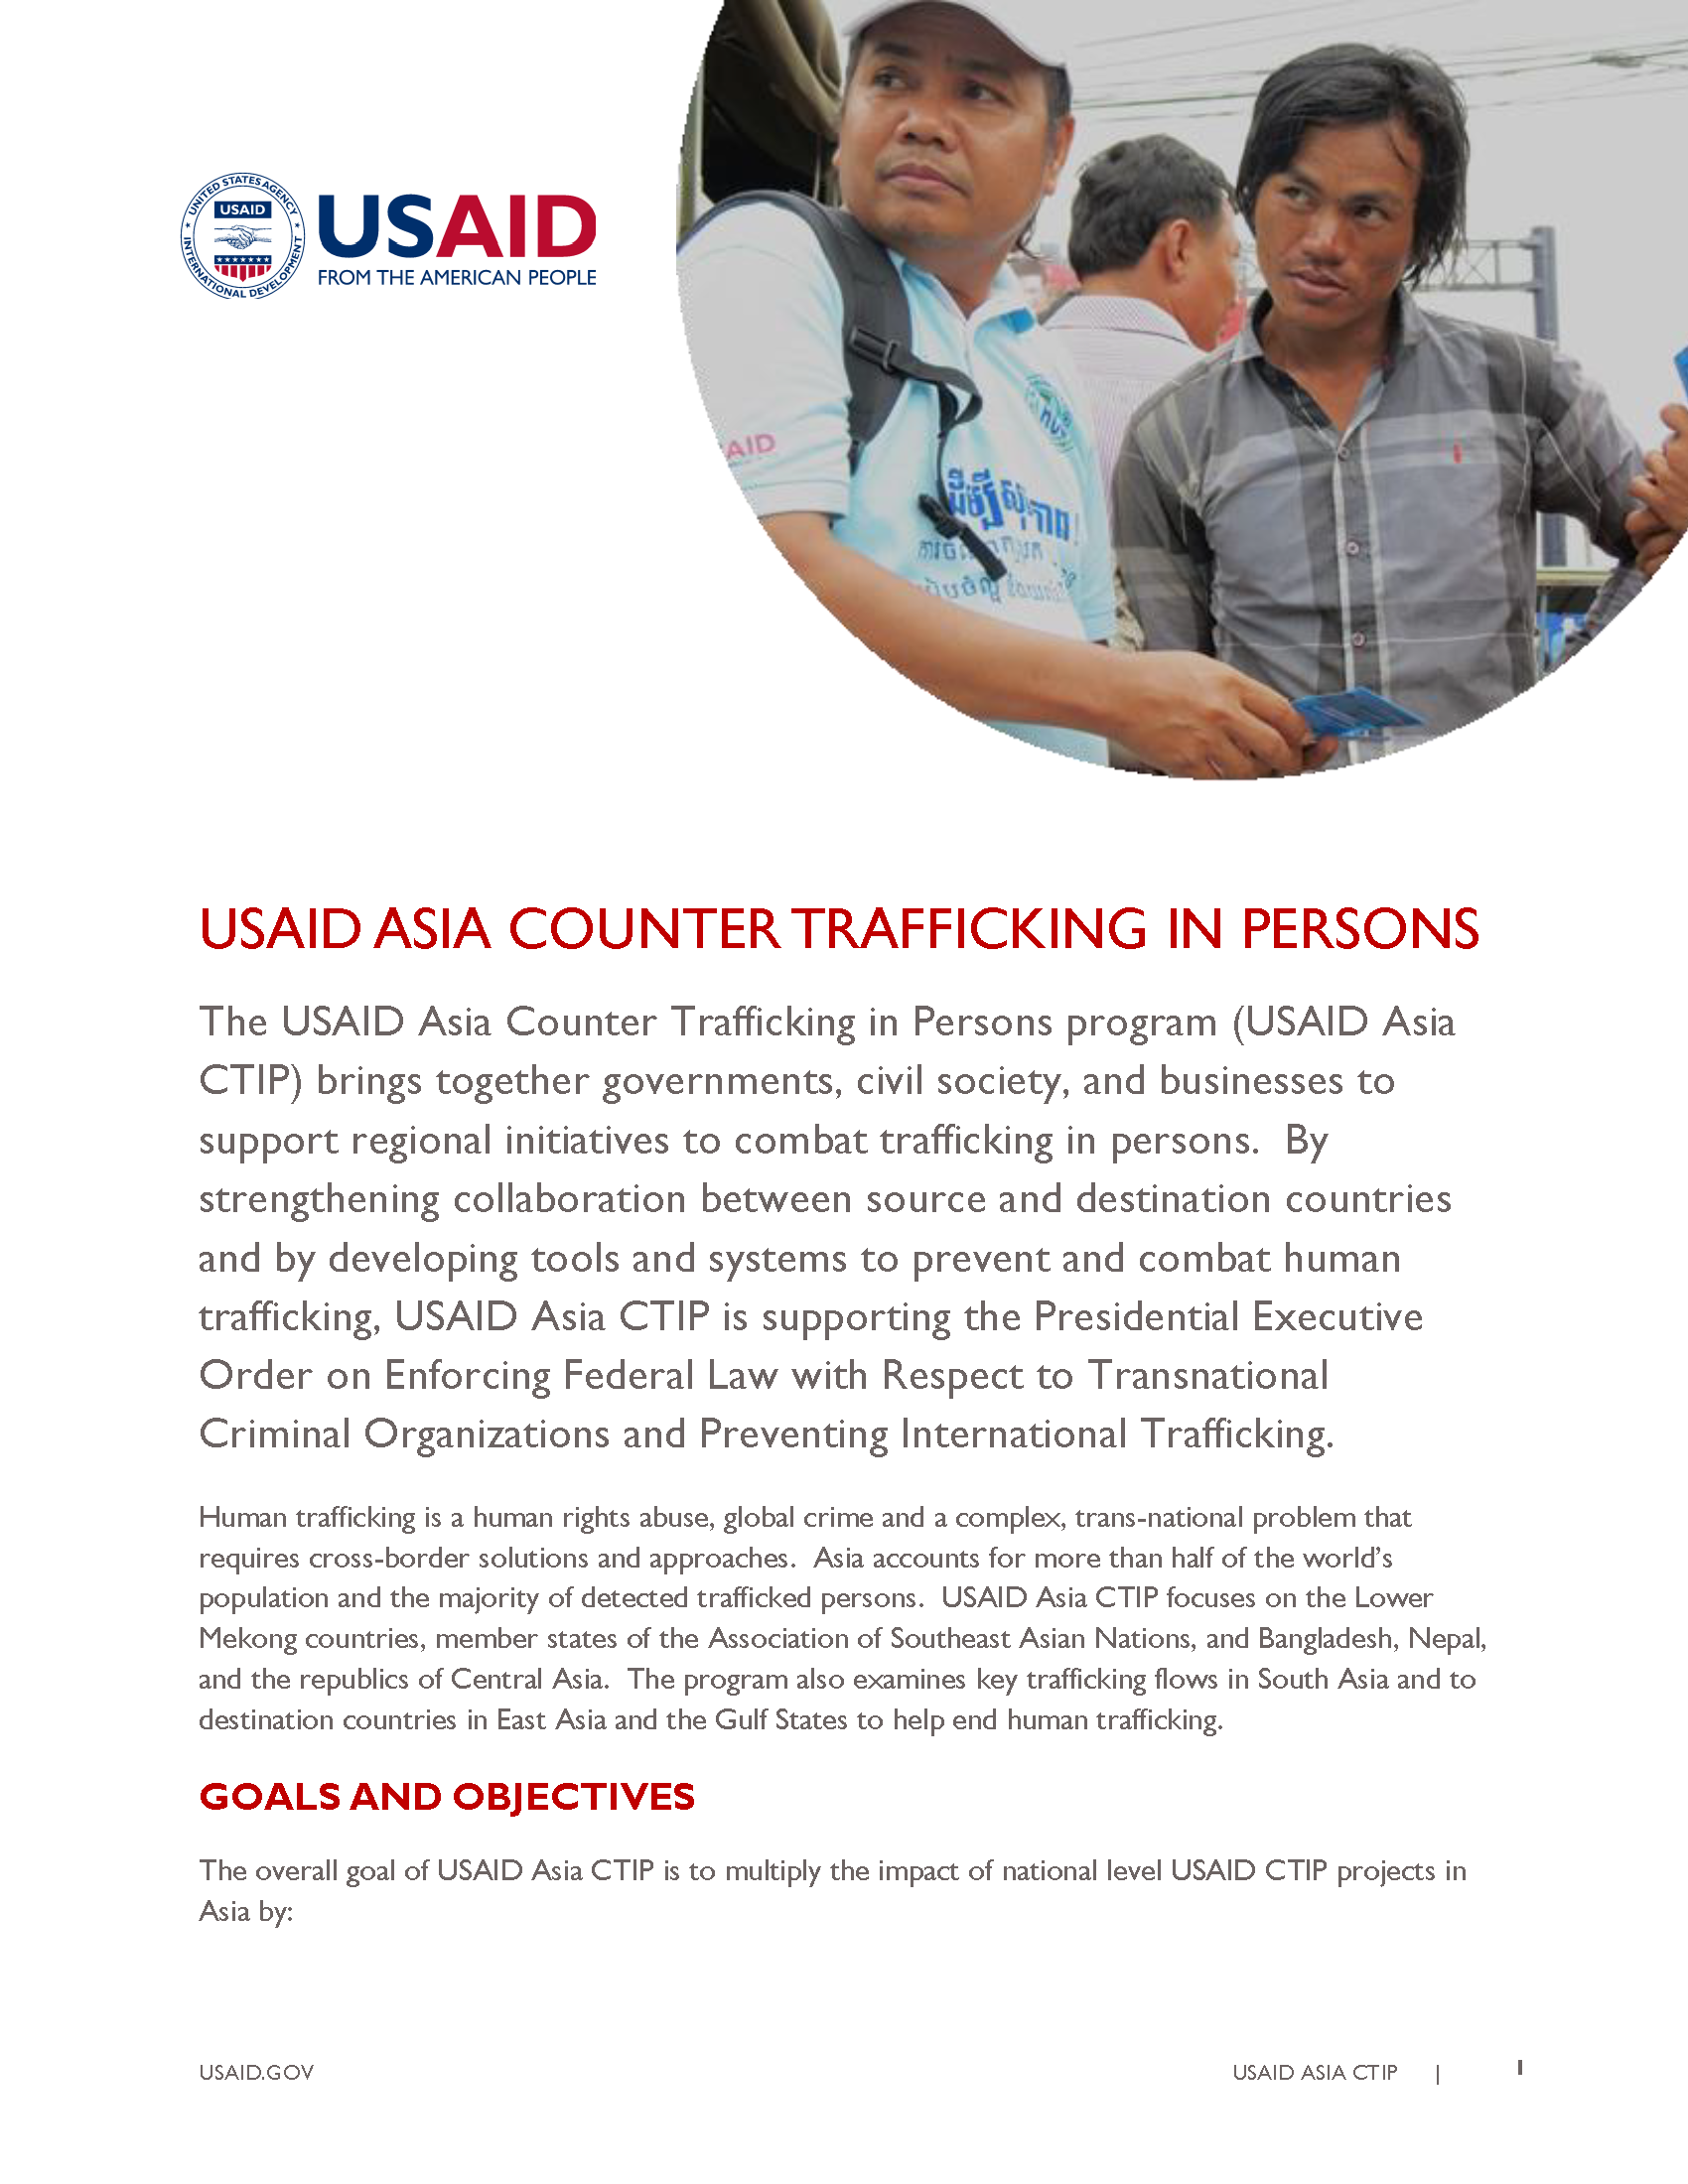 USAID Asia Counter Trafficking in Persons